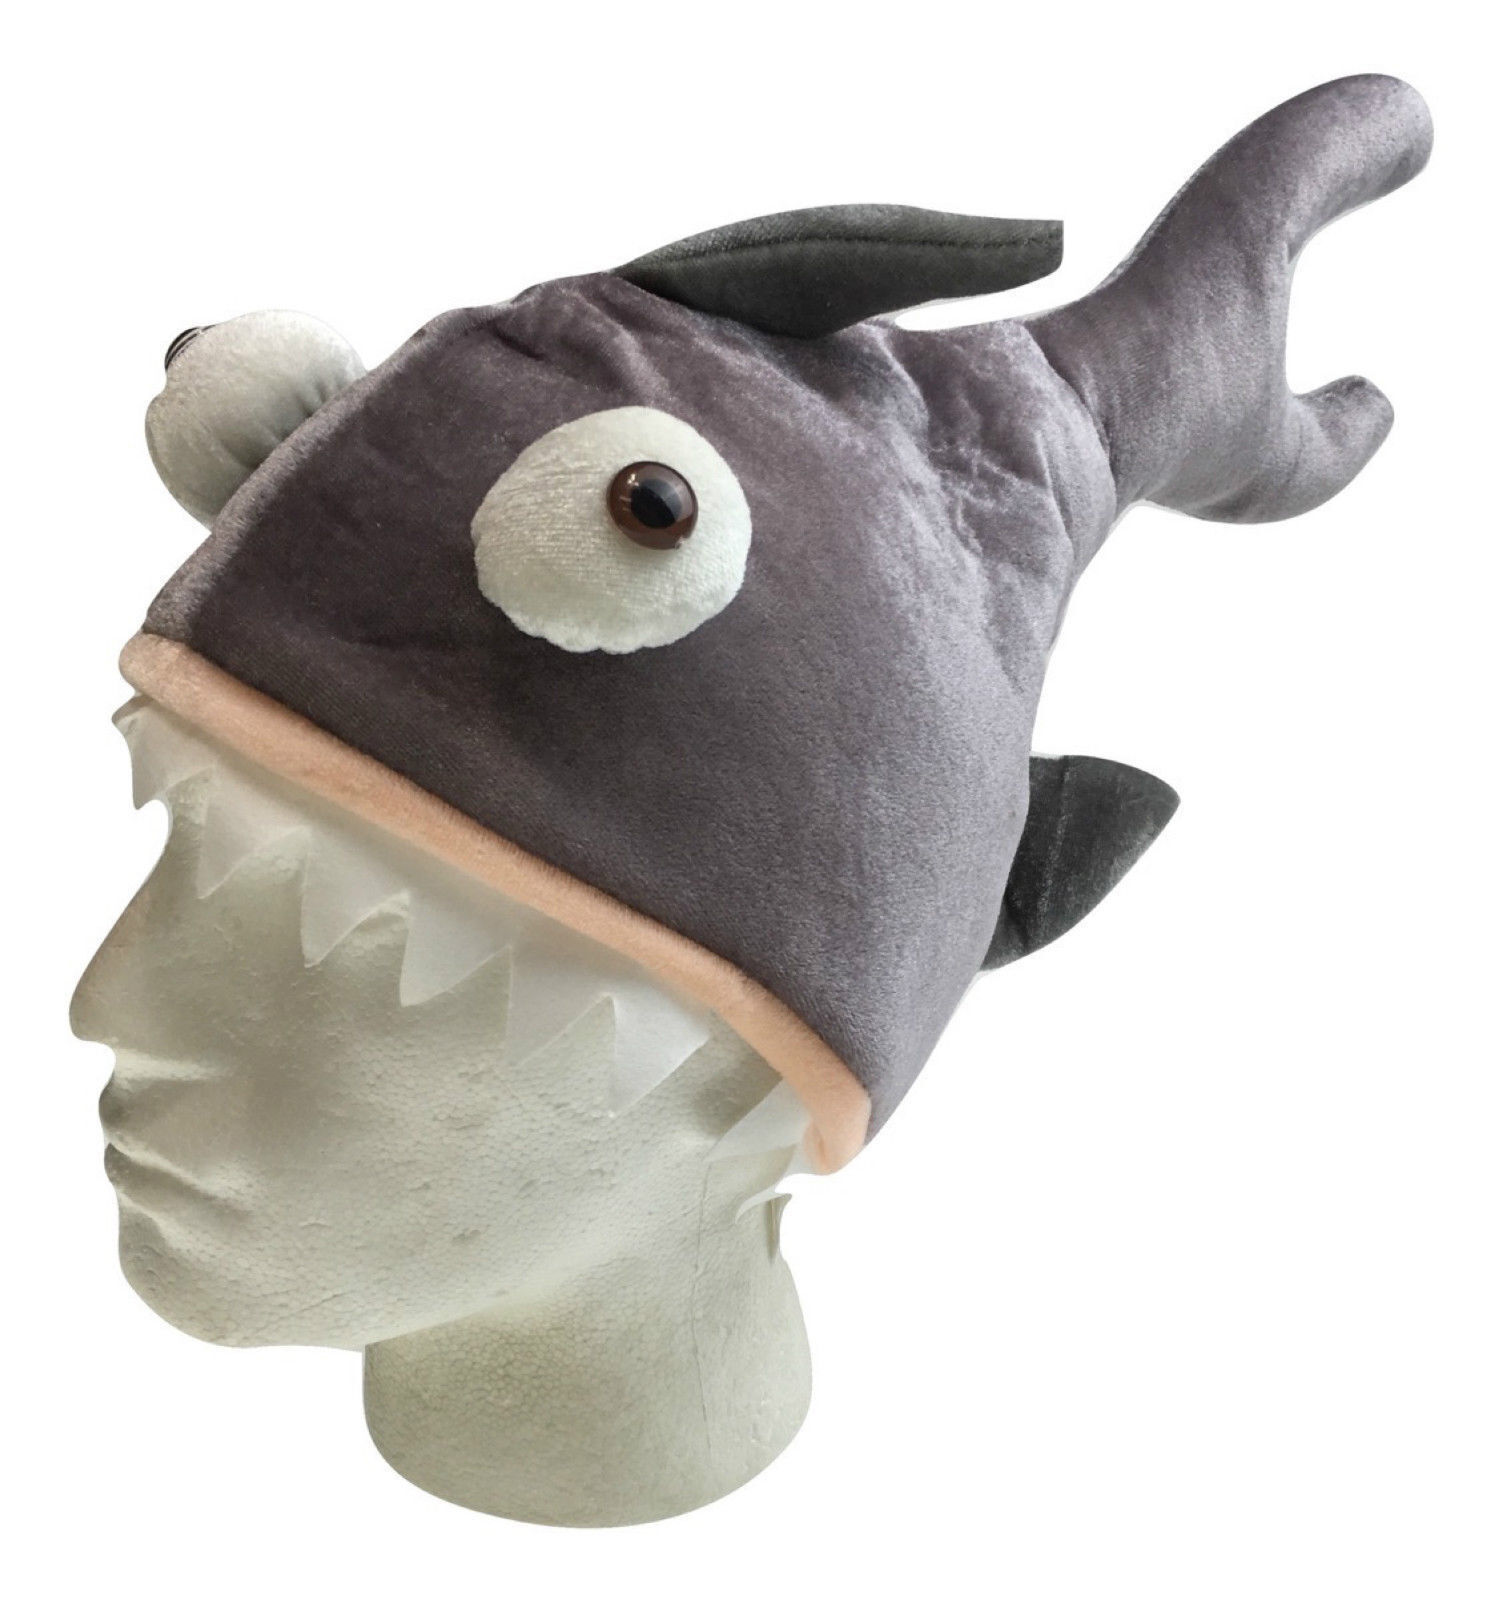 SHARK HAT Costume Accessory Fish Halloween Fancy Dress Up Party New Cap ...